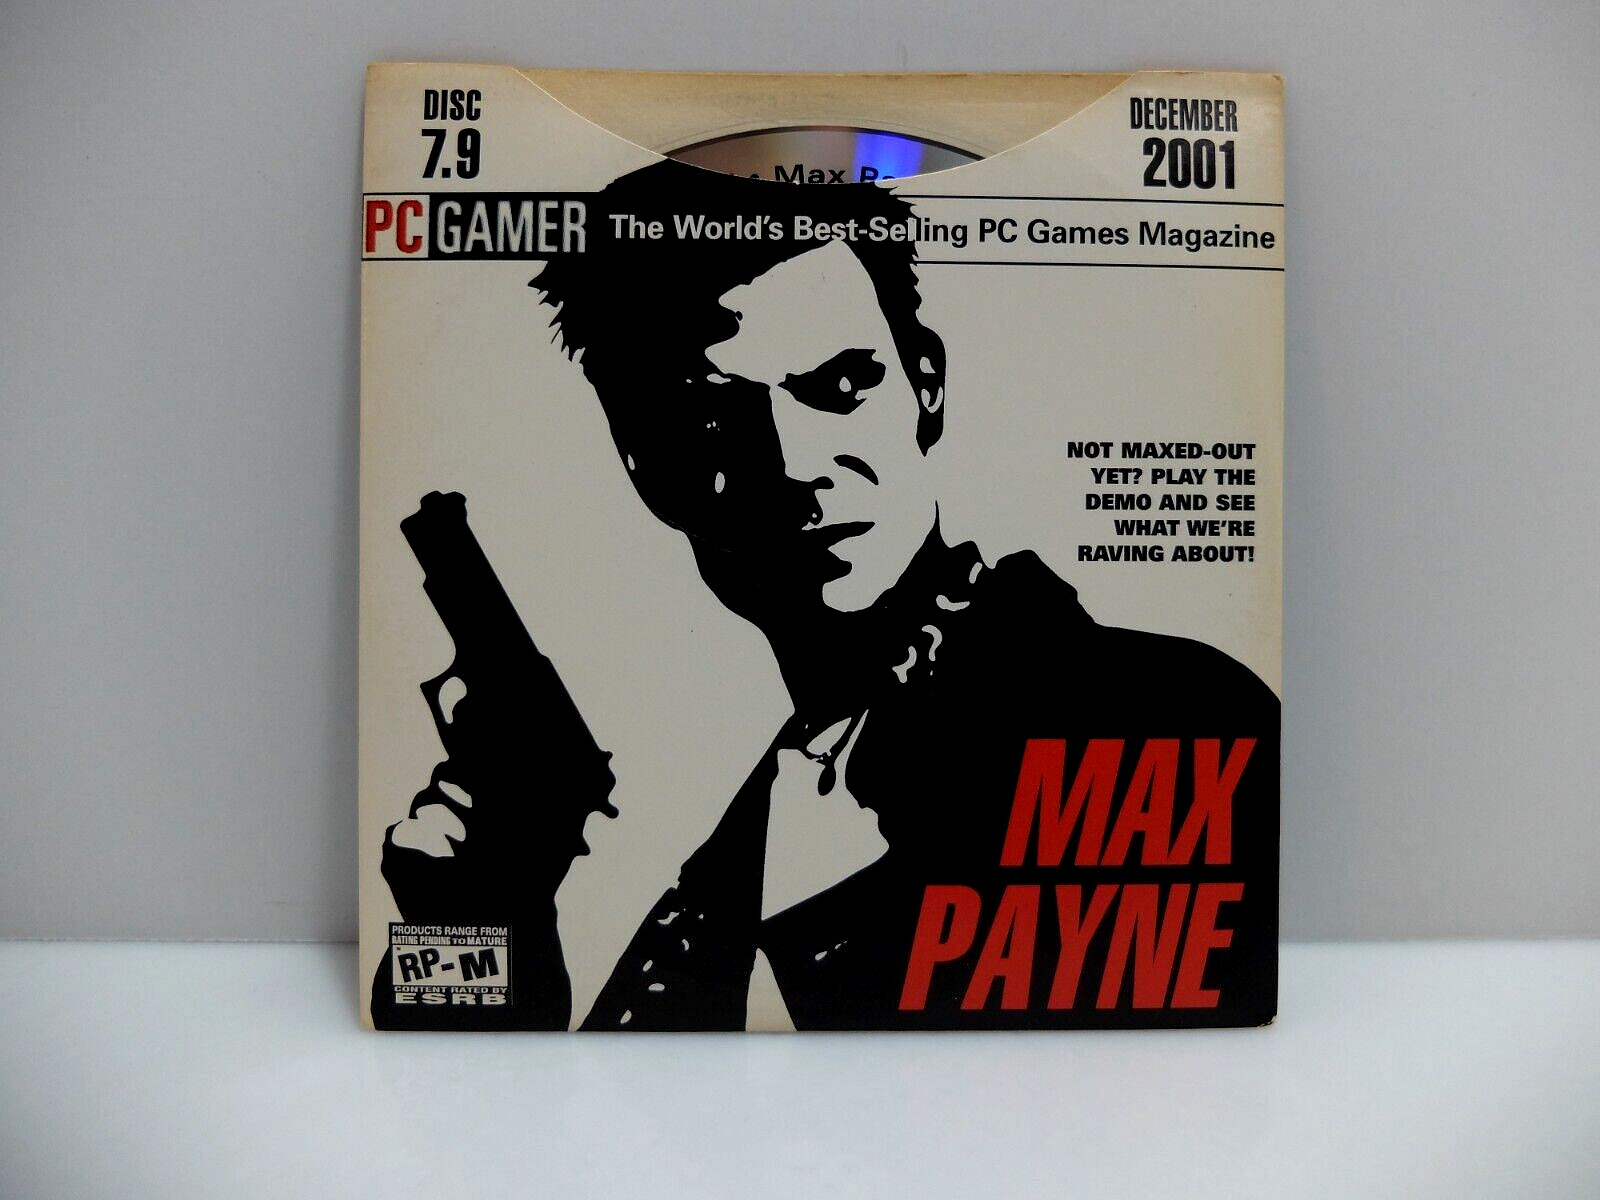 PC Gamer: Max Payne Demo Disc 7.9 - December 2001 - Not Compatible